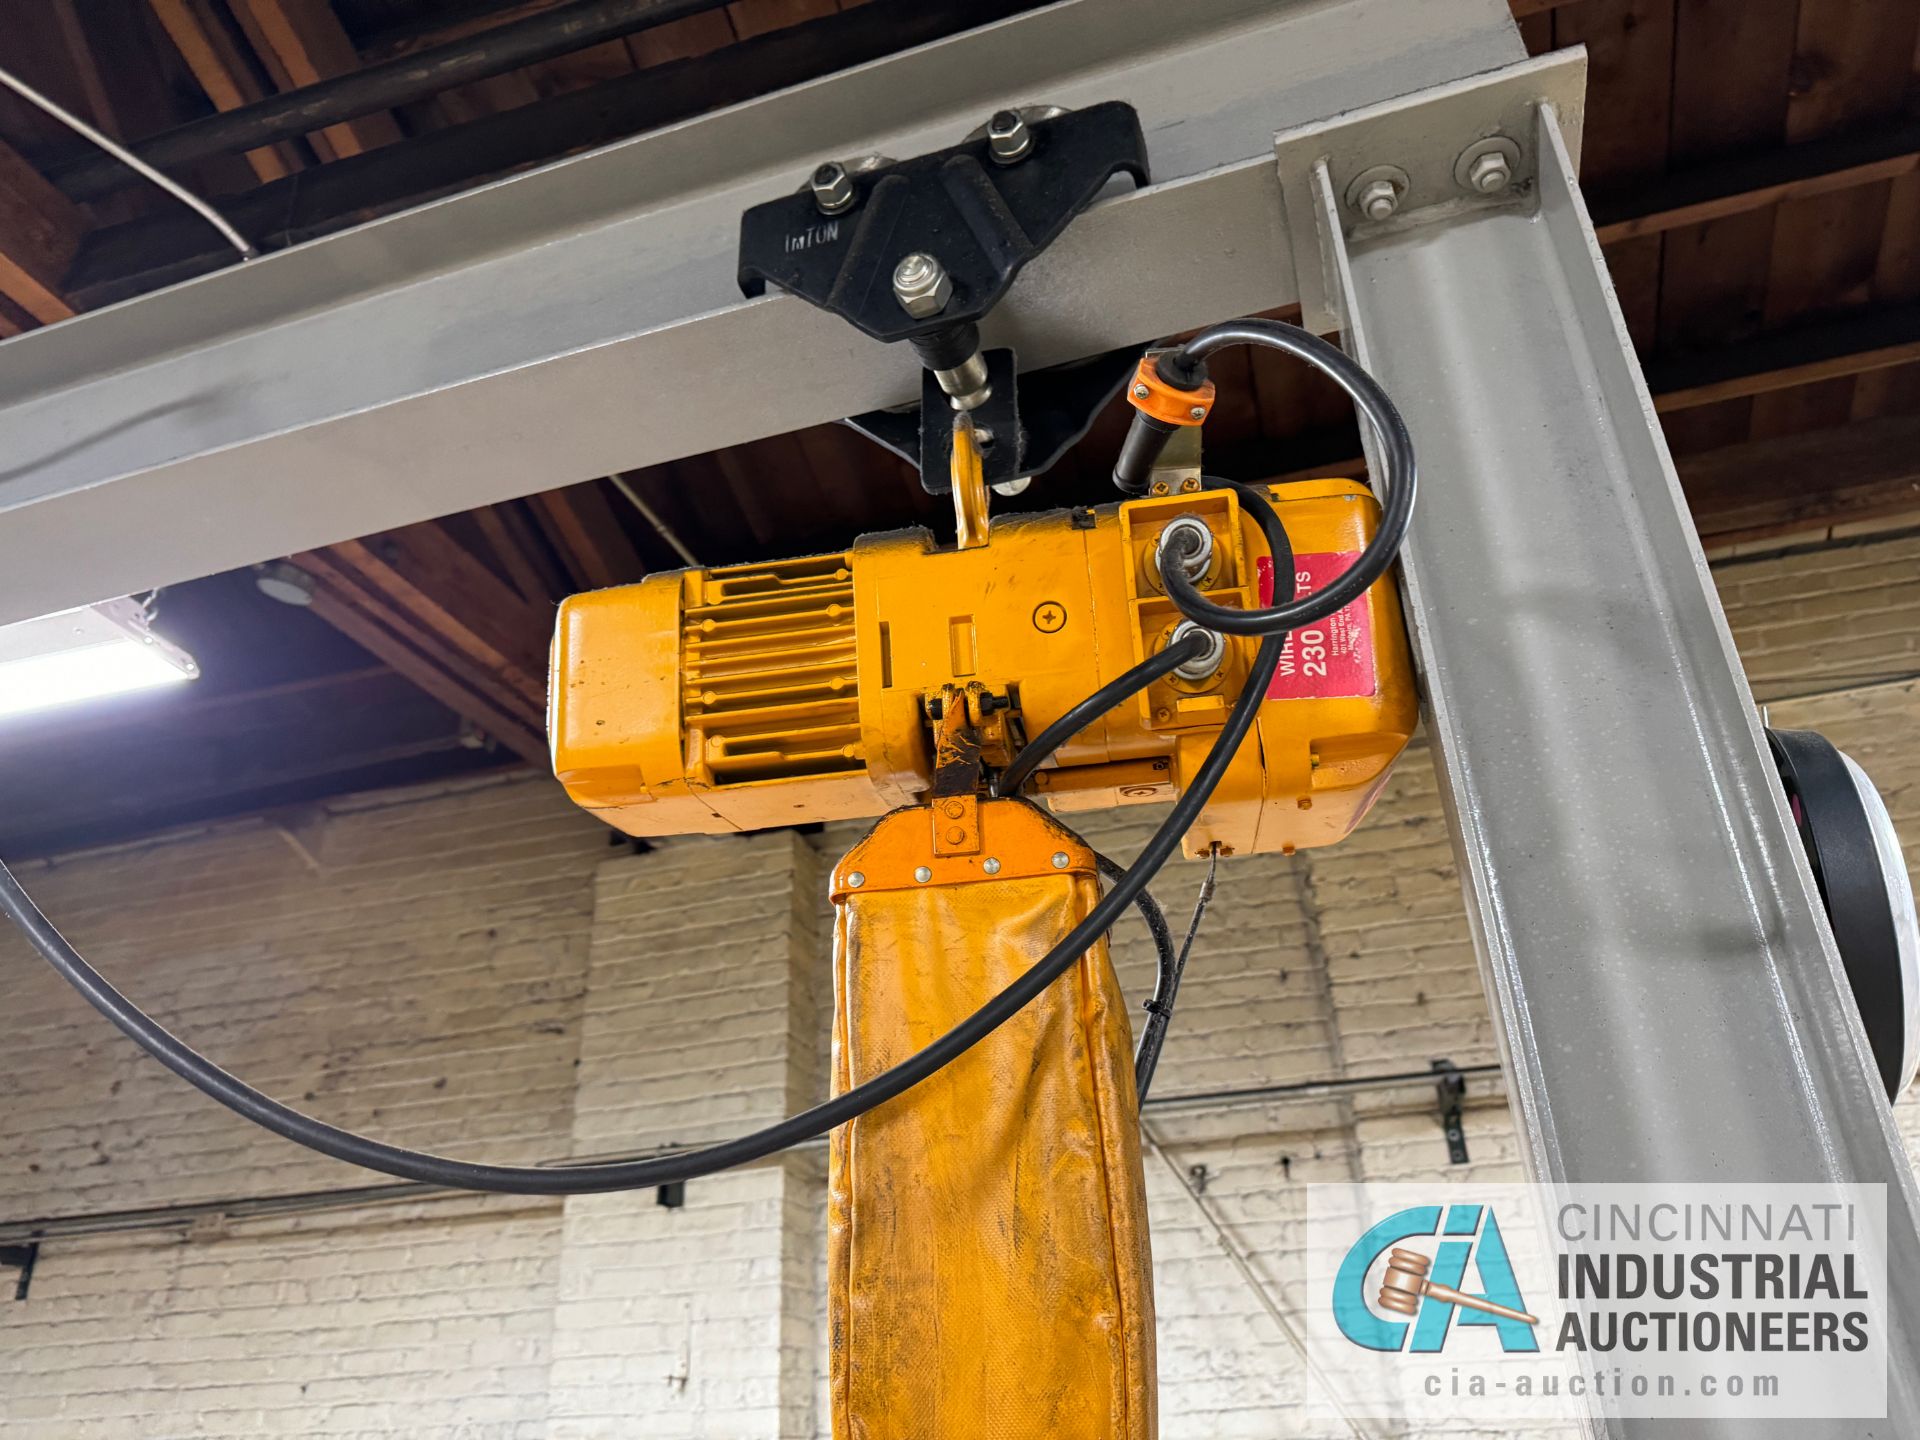 Free Standing 1 Crane w/ (2) 1 Ton Electric Hoists 6"x 6" Beams, 224" Span, 112" Beam Height - Image 5 of 5